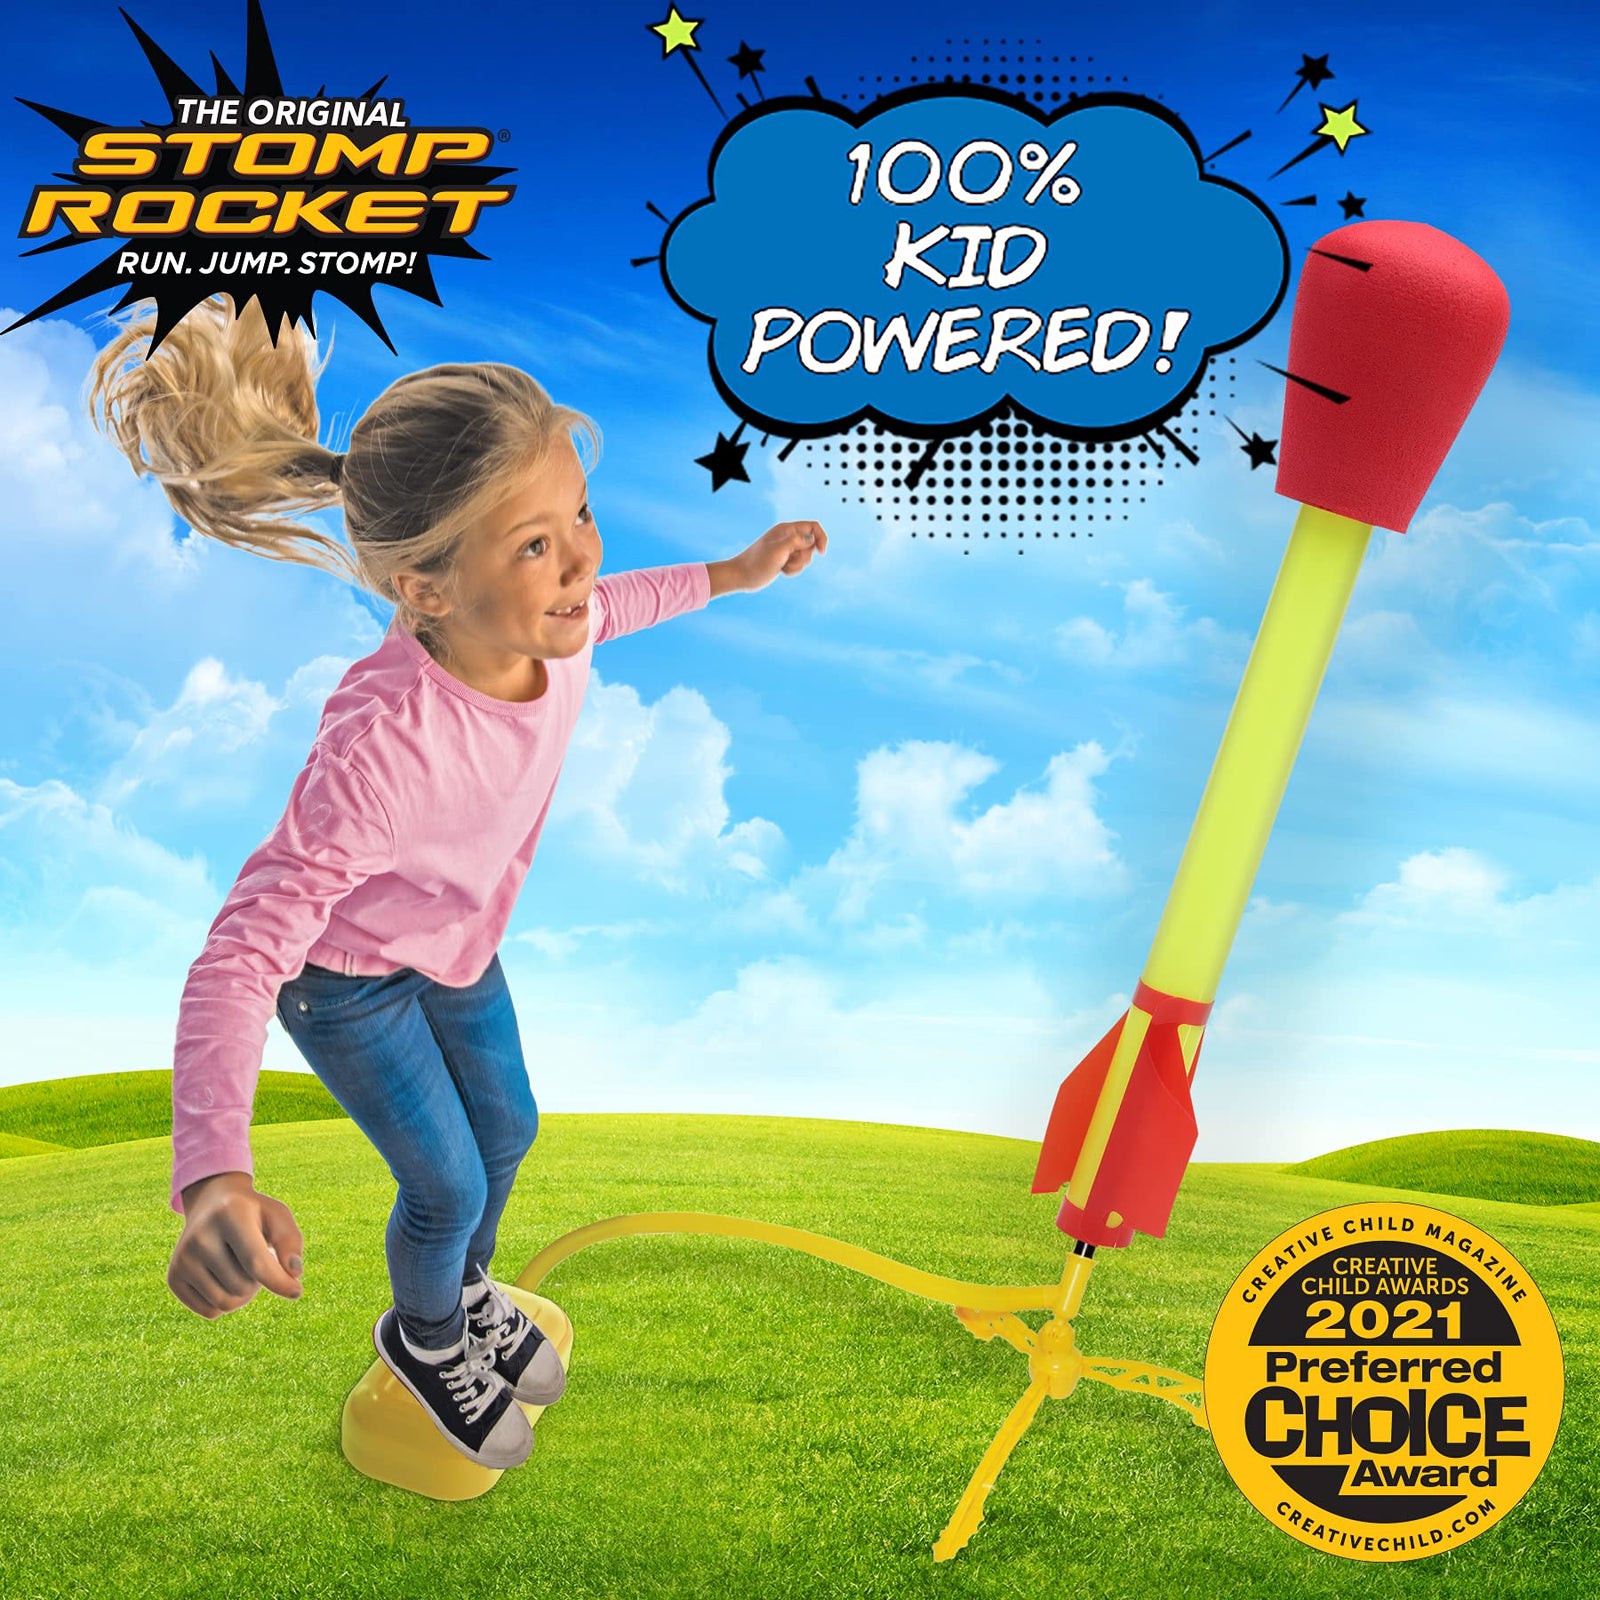 The Original Stomp Rocket Ultra Rocket Launcher with Ultra Refill Pack, 6 Rockets and Toy Air Rocket Launcher - Outdoor Rocket STEM Gift for Boys and Girls Ages 5 Years and Up - Great for Outdoor Play